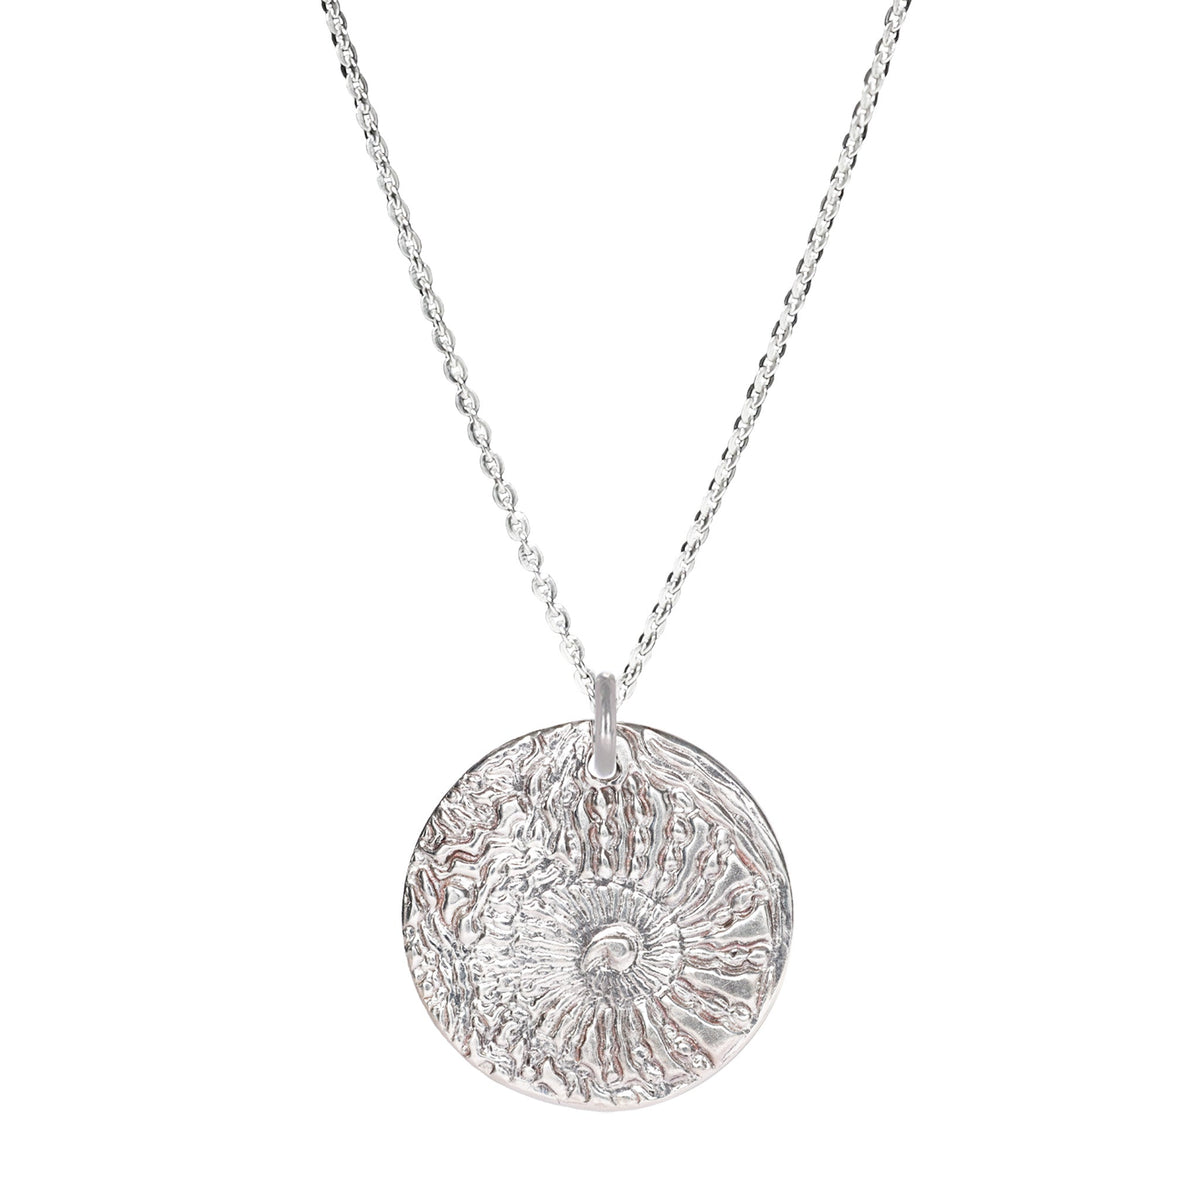 Nautilus Textured Large Sterling Silver Necklace on a Sterling Silver Cable Chain